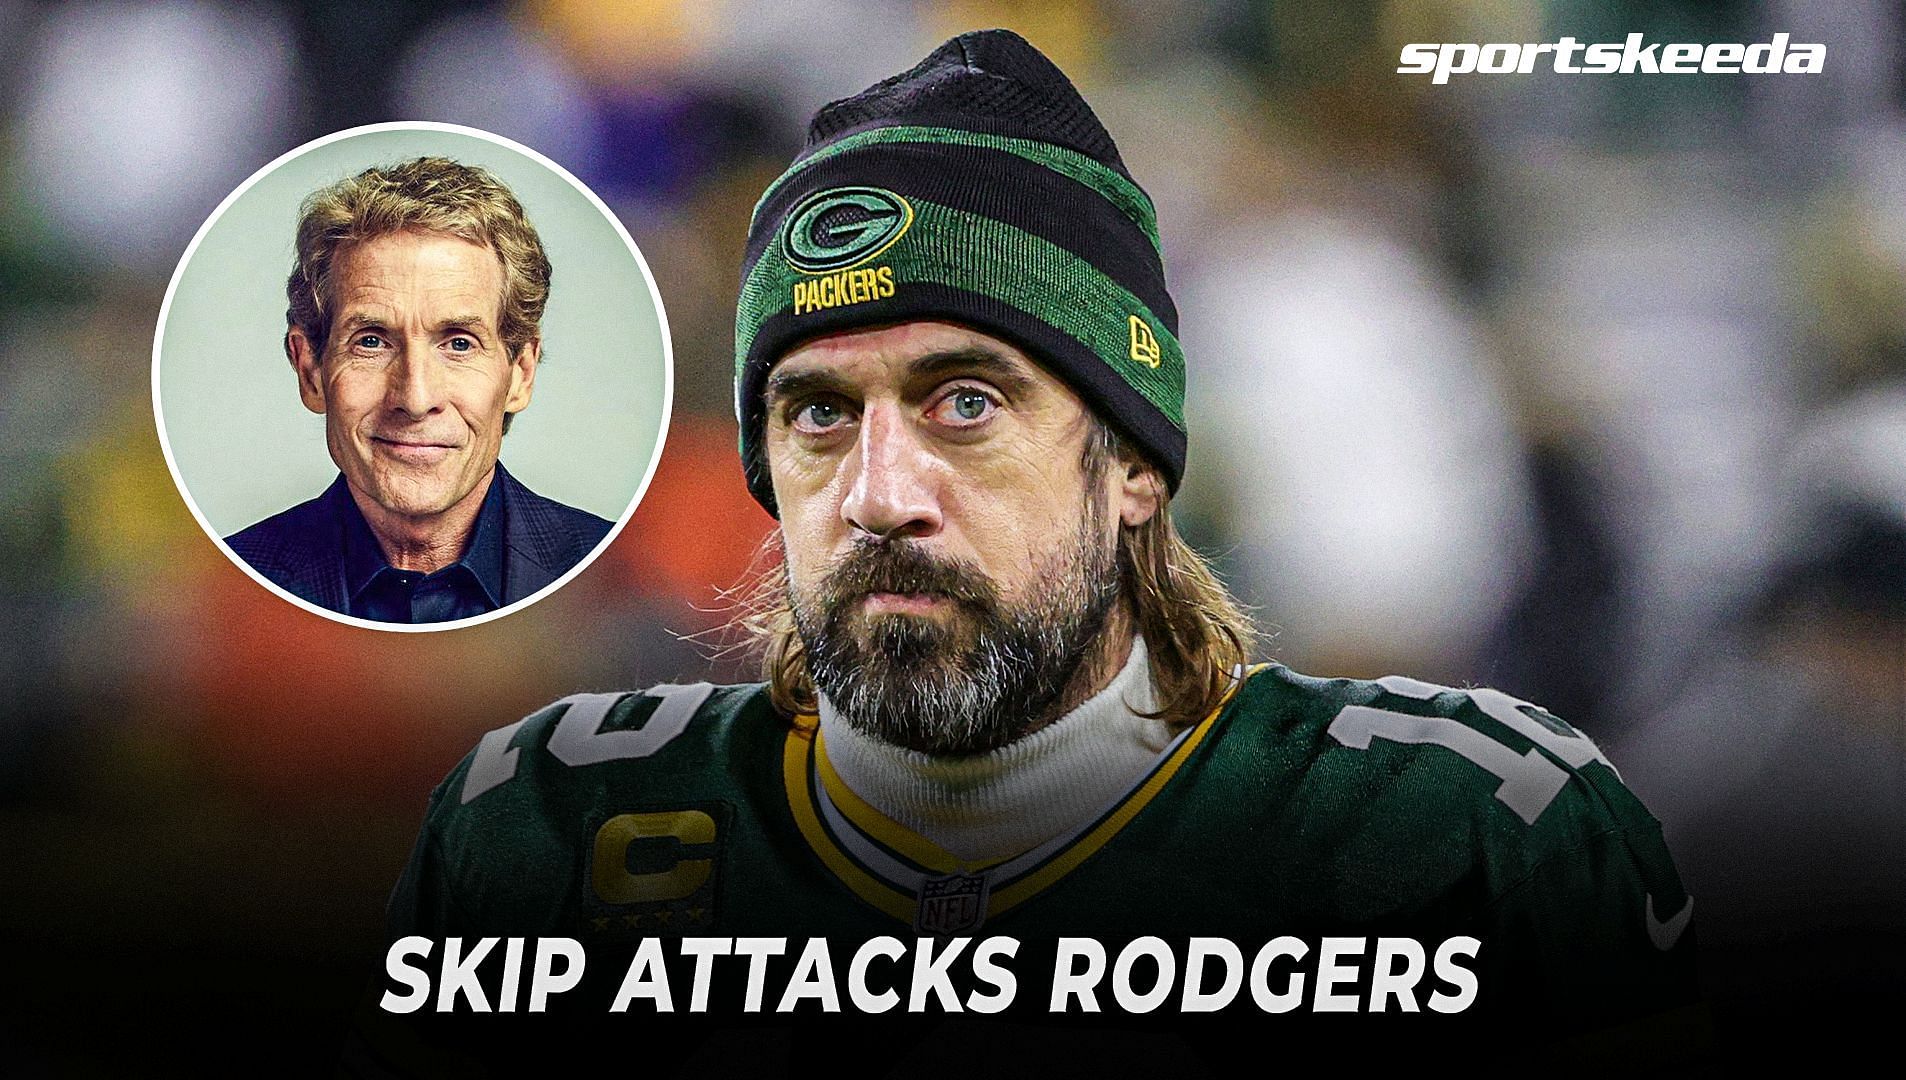 Green Bay Packers quarterback Aaron Rodgers. Inset: Skip Bayless